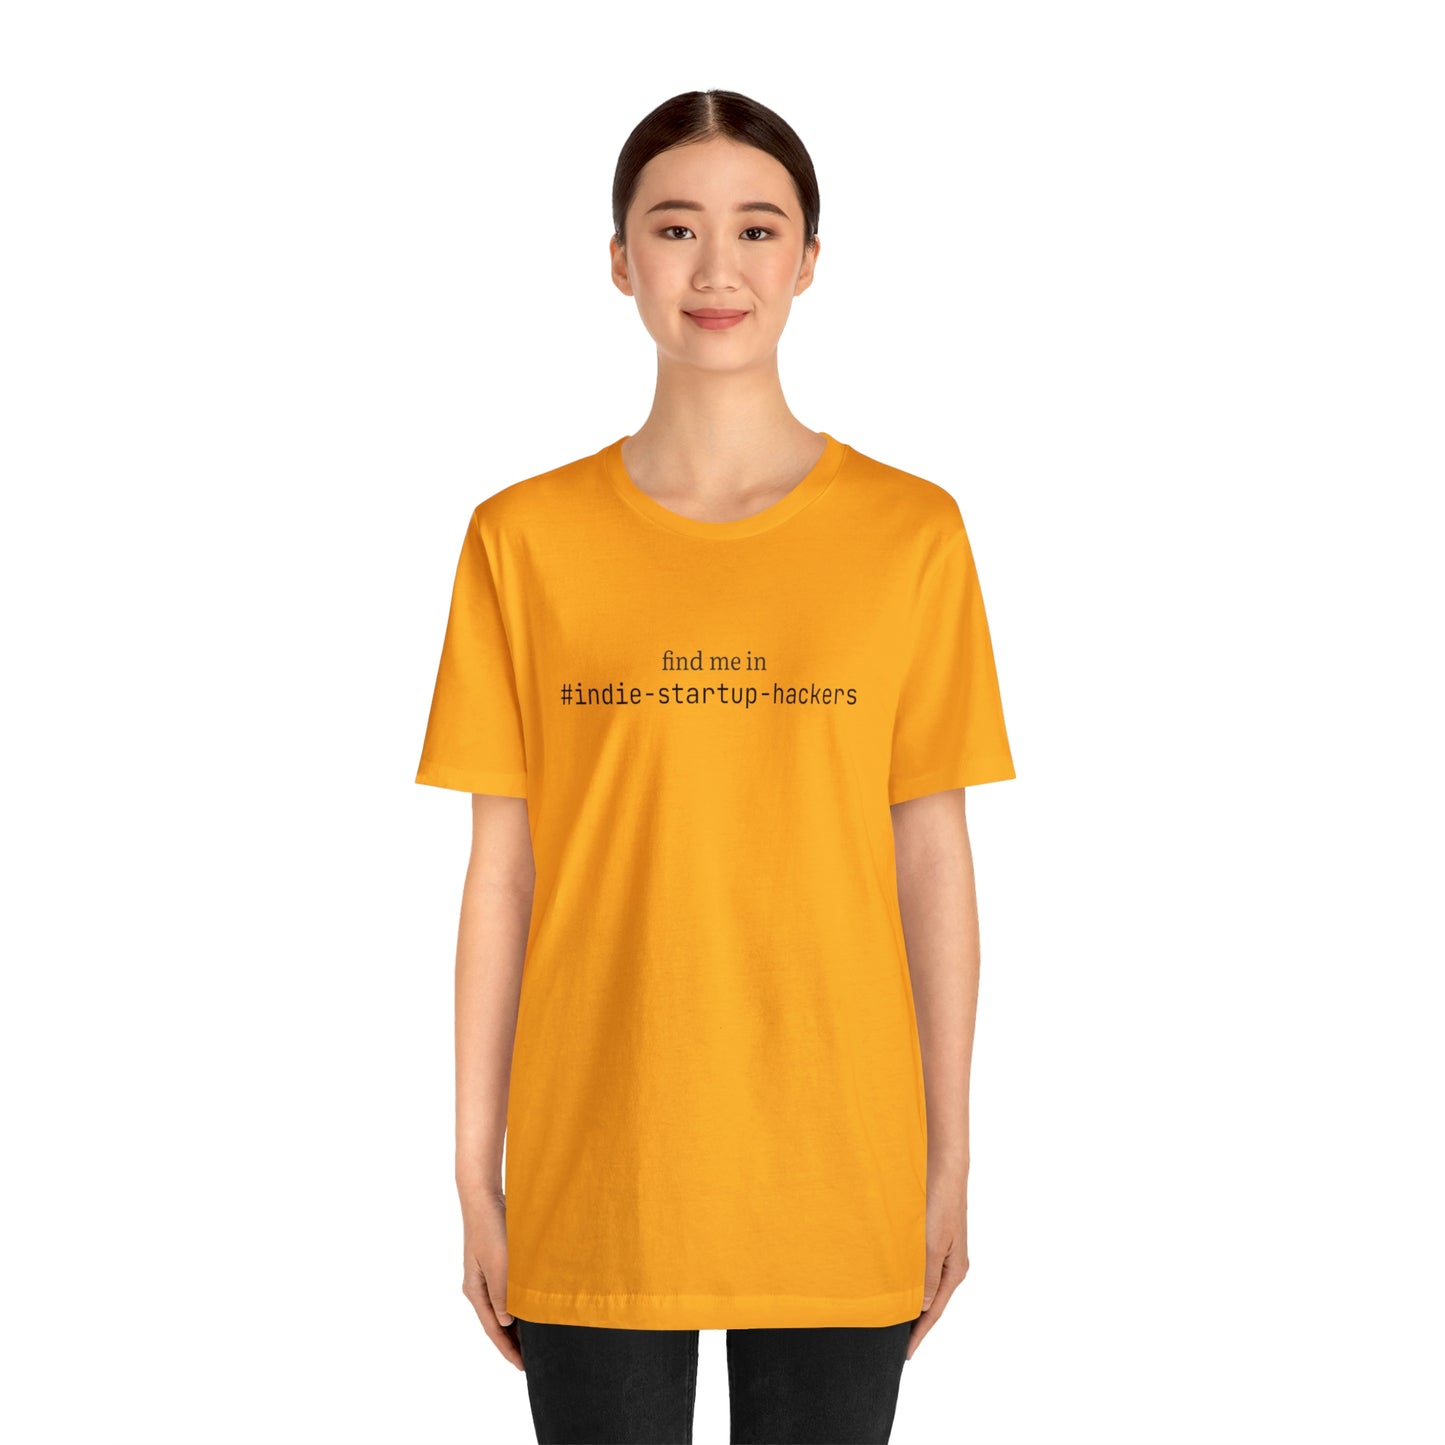 Find me in #indie-startup-hackers T-Shirt